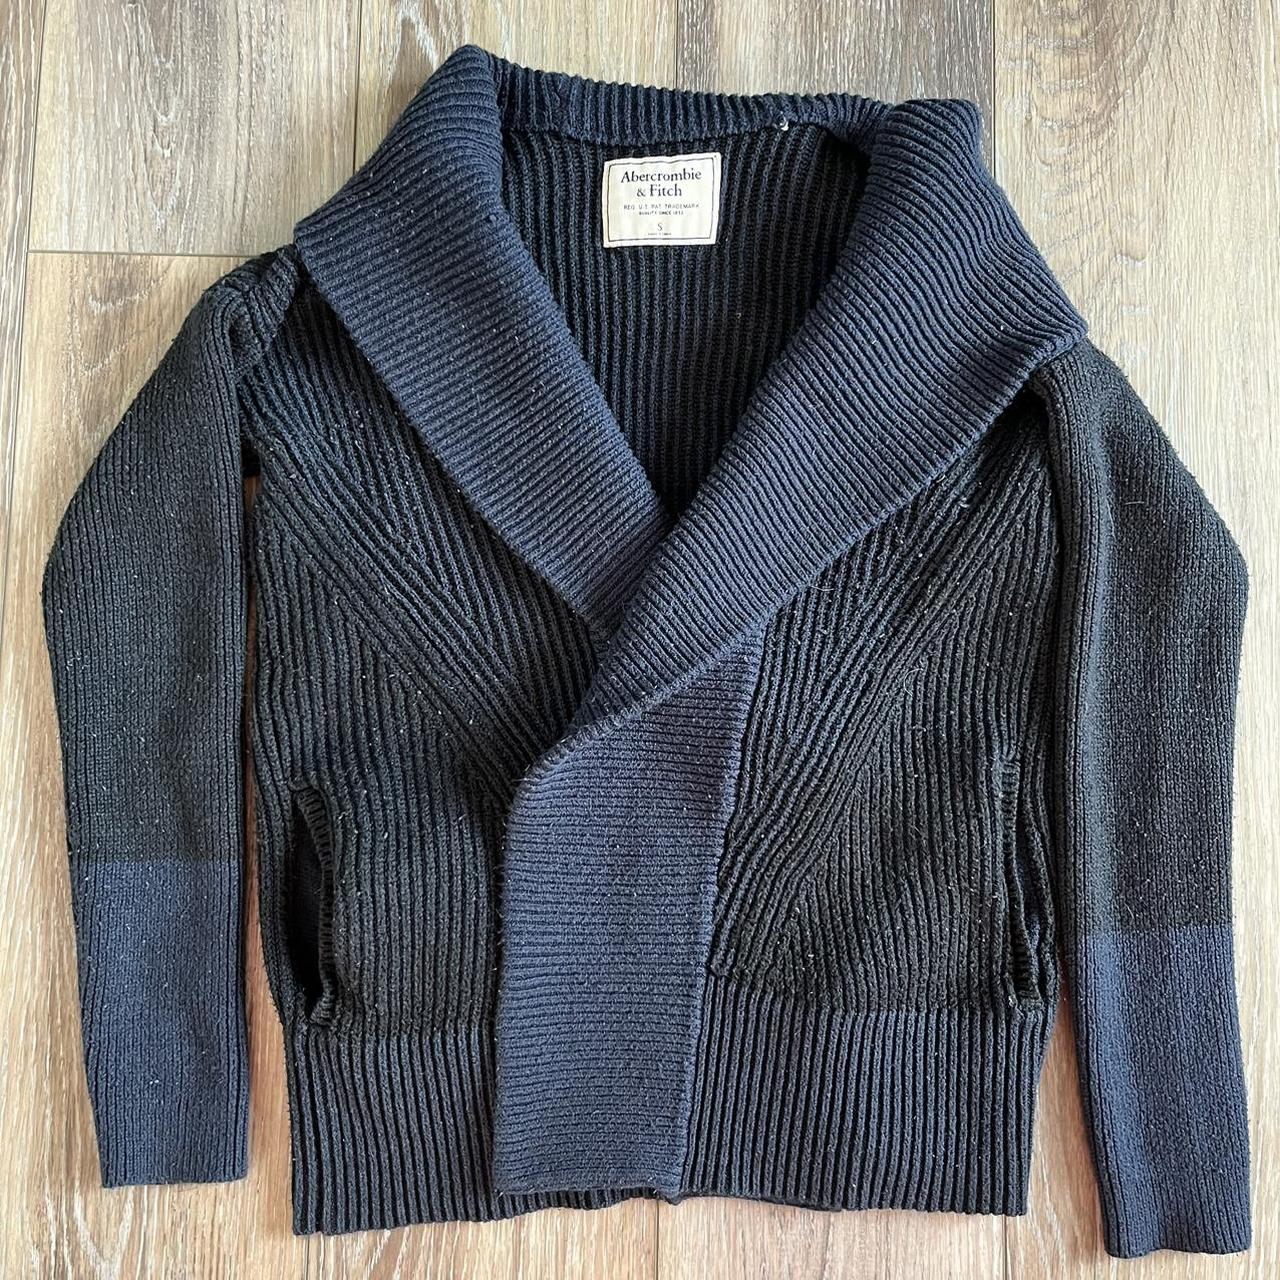 Navy Abercrombie & Fitch Sweater Only flaw is the... - Depop